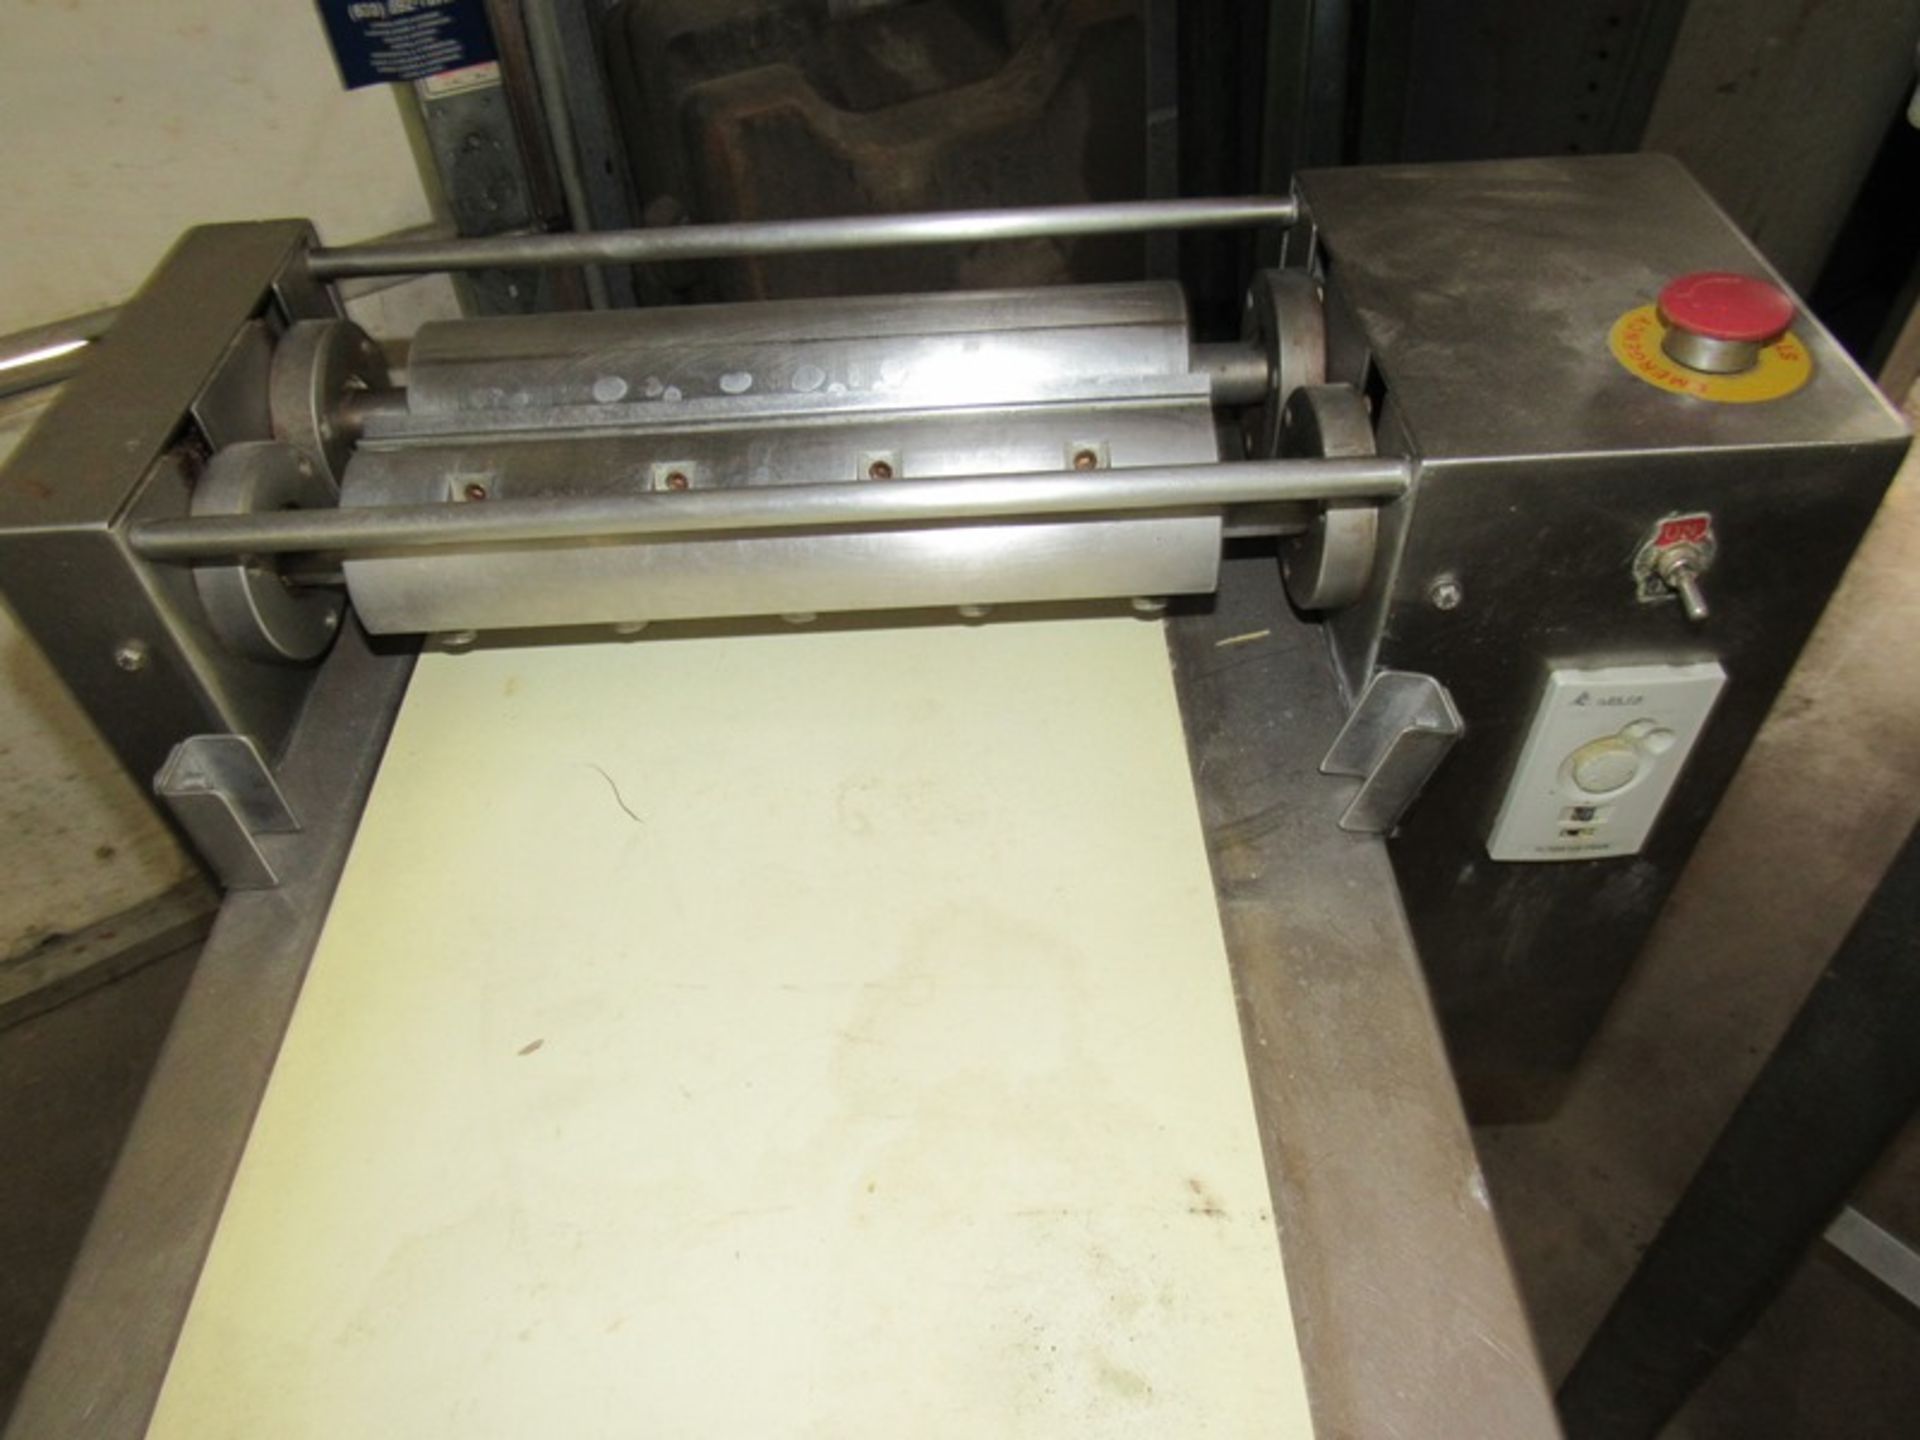 Stainless Steel Folding Conveyor with guillotine cutter 12" W X 14' L, 220 volts - Image 4 of 6